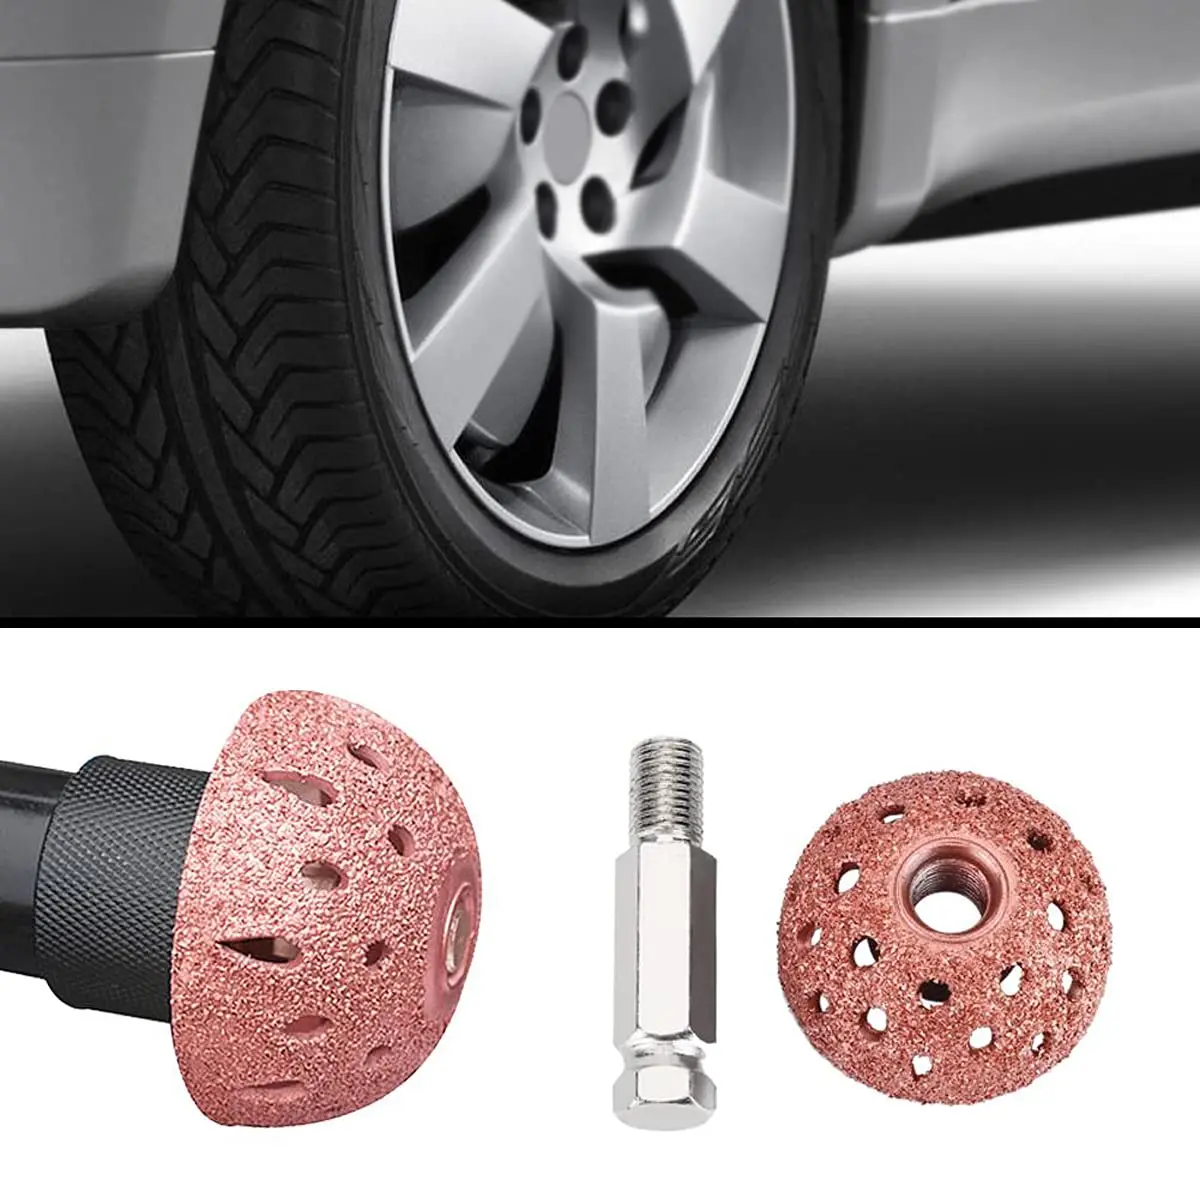 1.5 Inch 38mm 70 Grid Buffing Wheel for Tire,CSCTEK Universal 3/8-24 Thread Rubber Tungsten Steel Bowl Tool for Tire,Grinding Head with 11mm Shank Rod Adapter 0.43 inch 